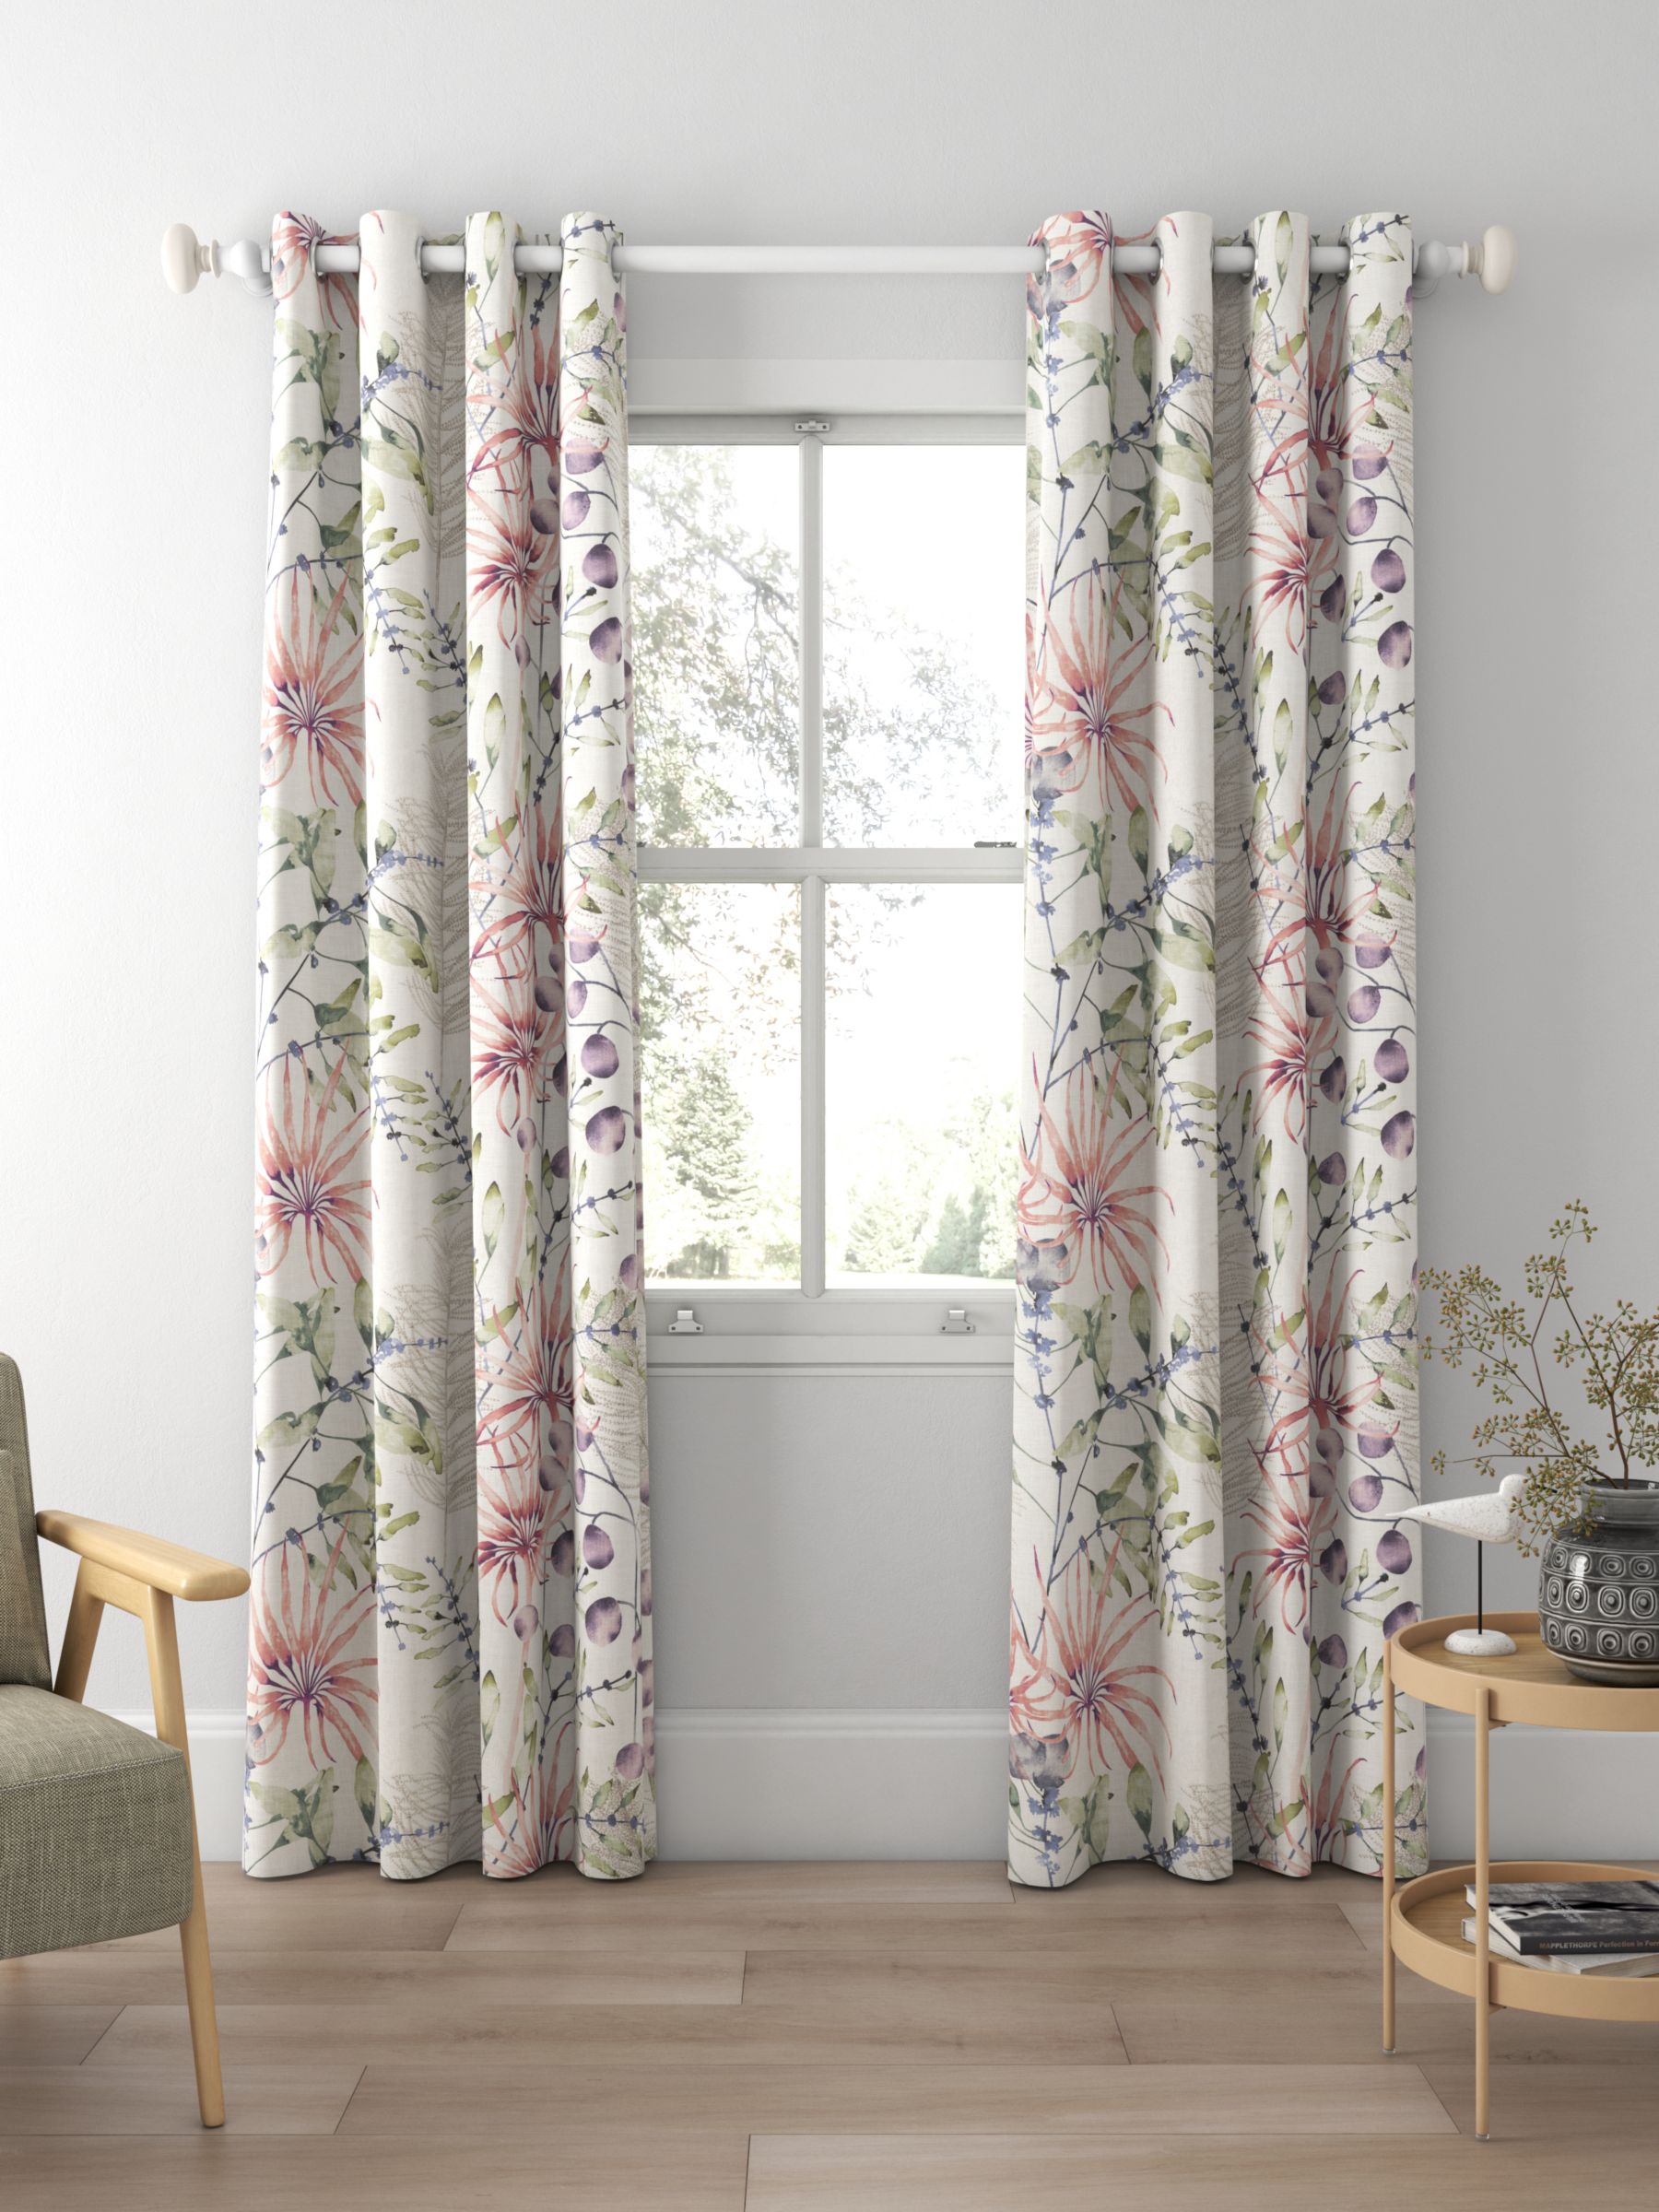 Harlequin Postelia Made to Measure Curtains or Roman Blind, Berry/Heather